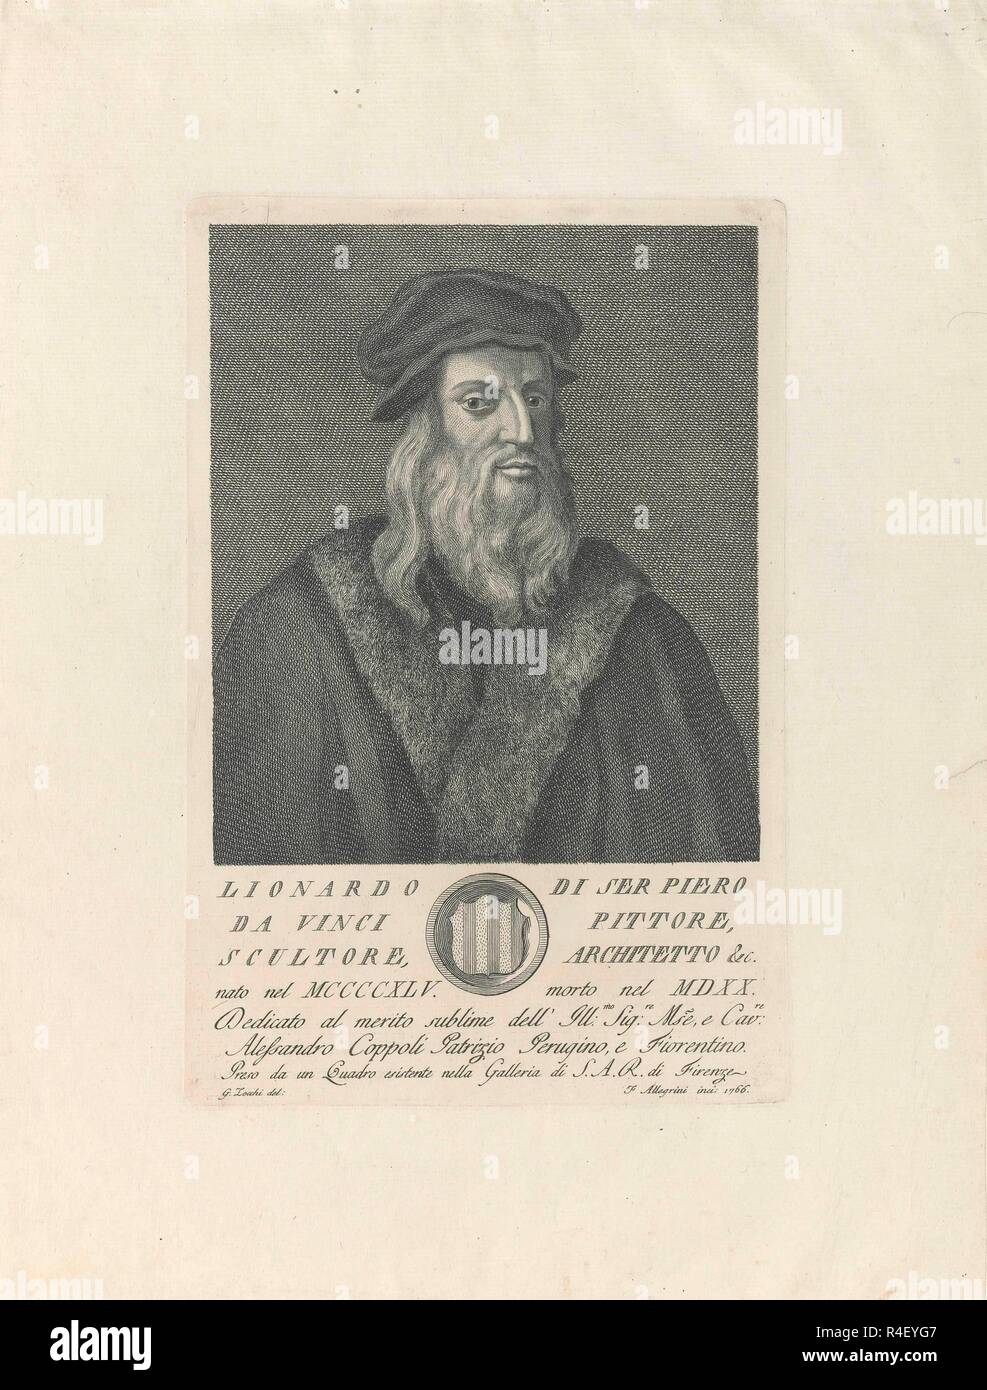 PORTRAIT OF LEONARDO DA VINCI - PAINTED IN THE 17TH CENTURY AND ENGRAVED IN THE 18TH CENTURY. Author: ALLEGRINI, FRANCESCO. Location: PRIVATE COLLECTION. Stock Photo